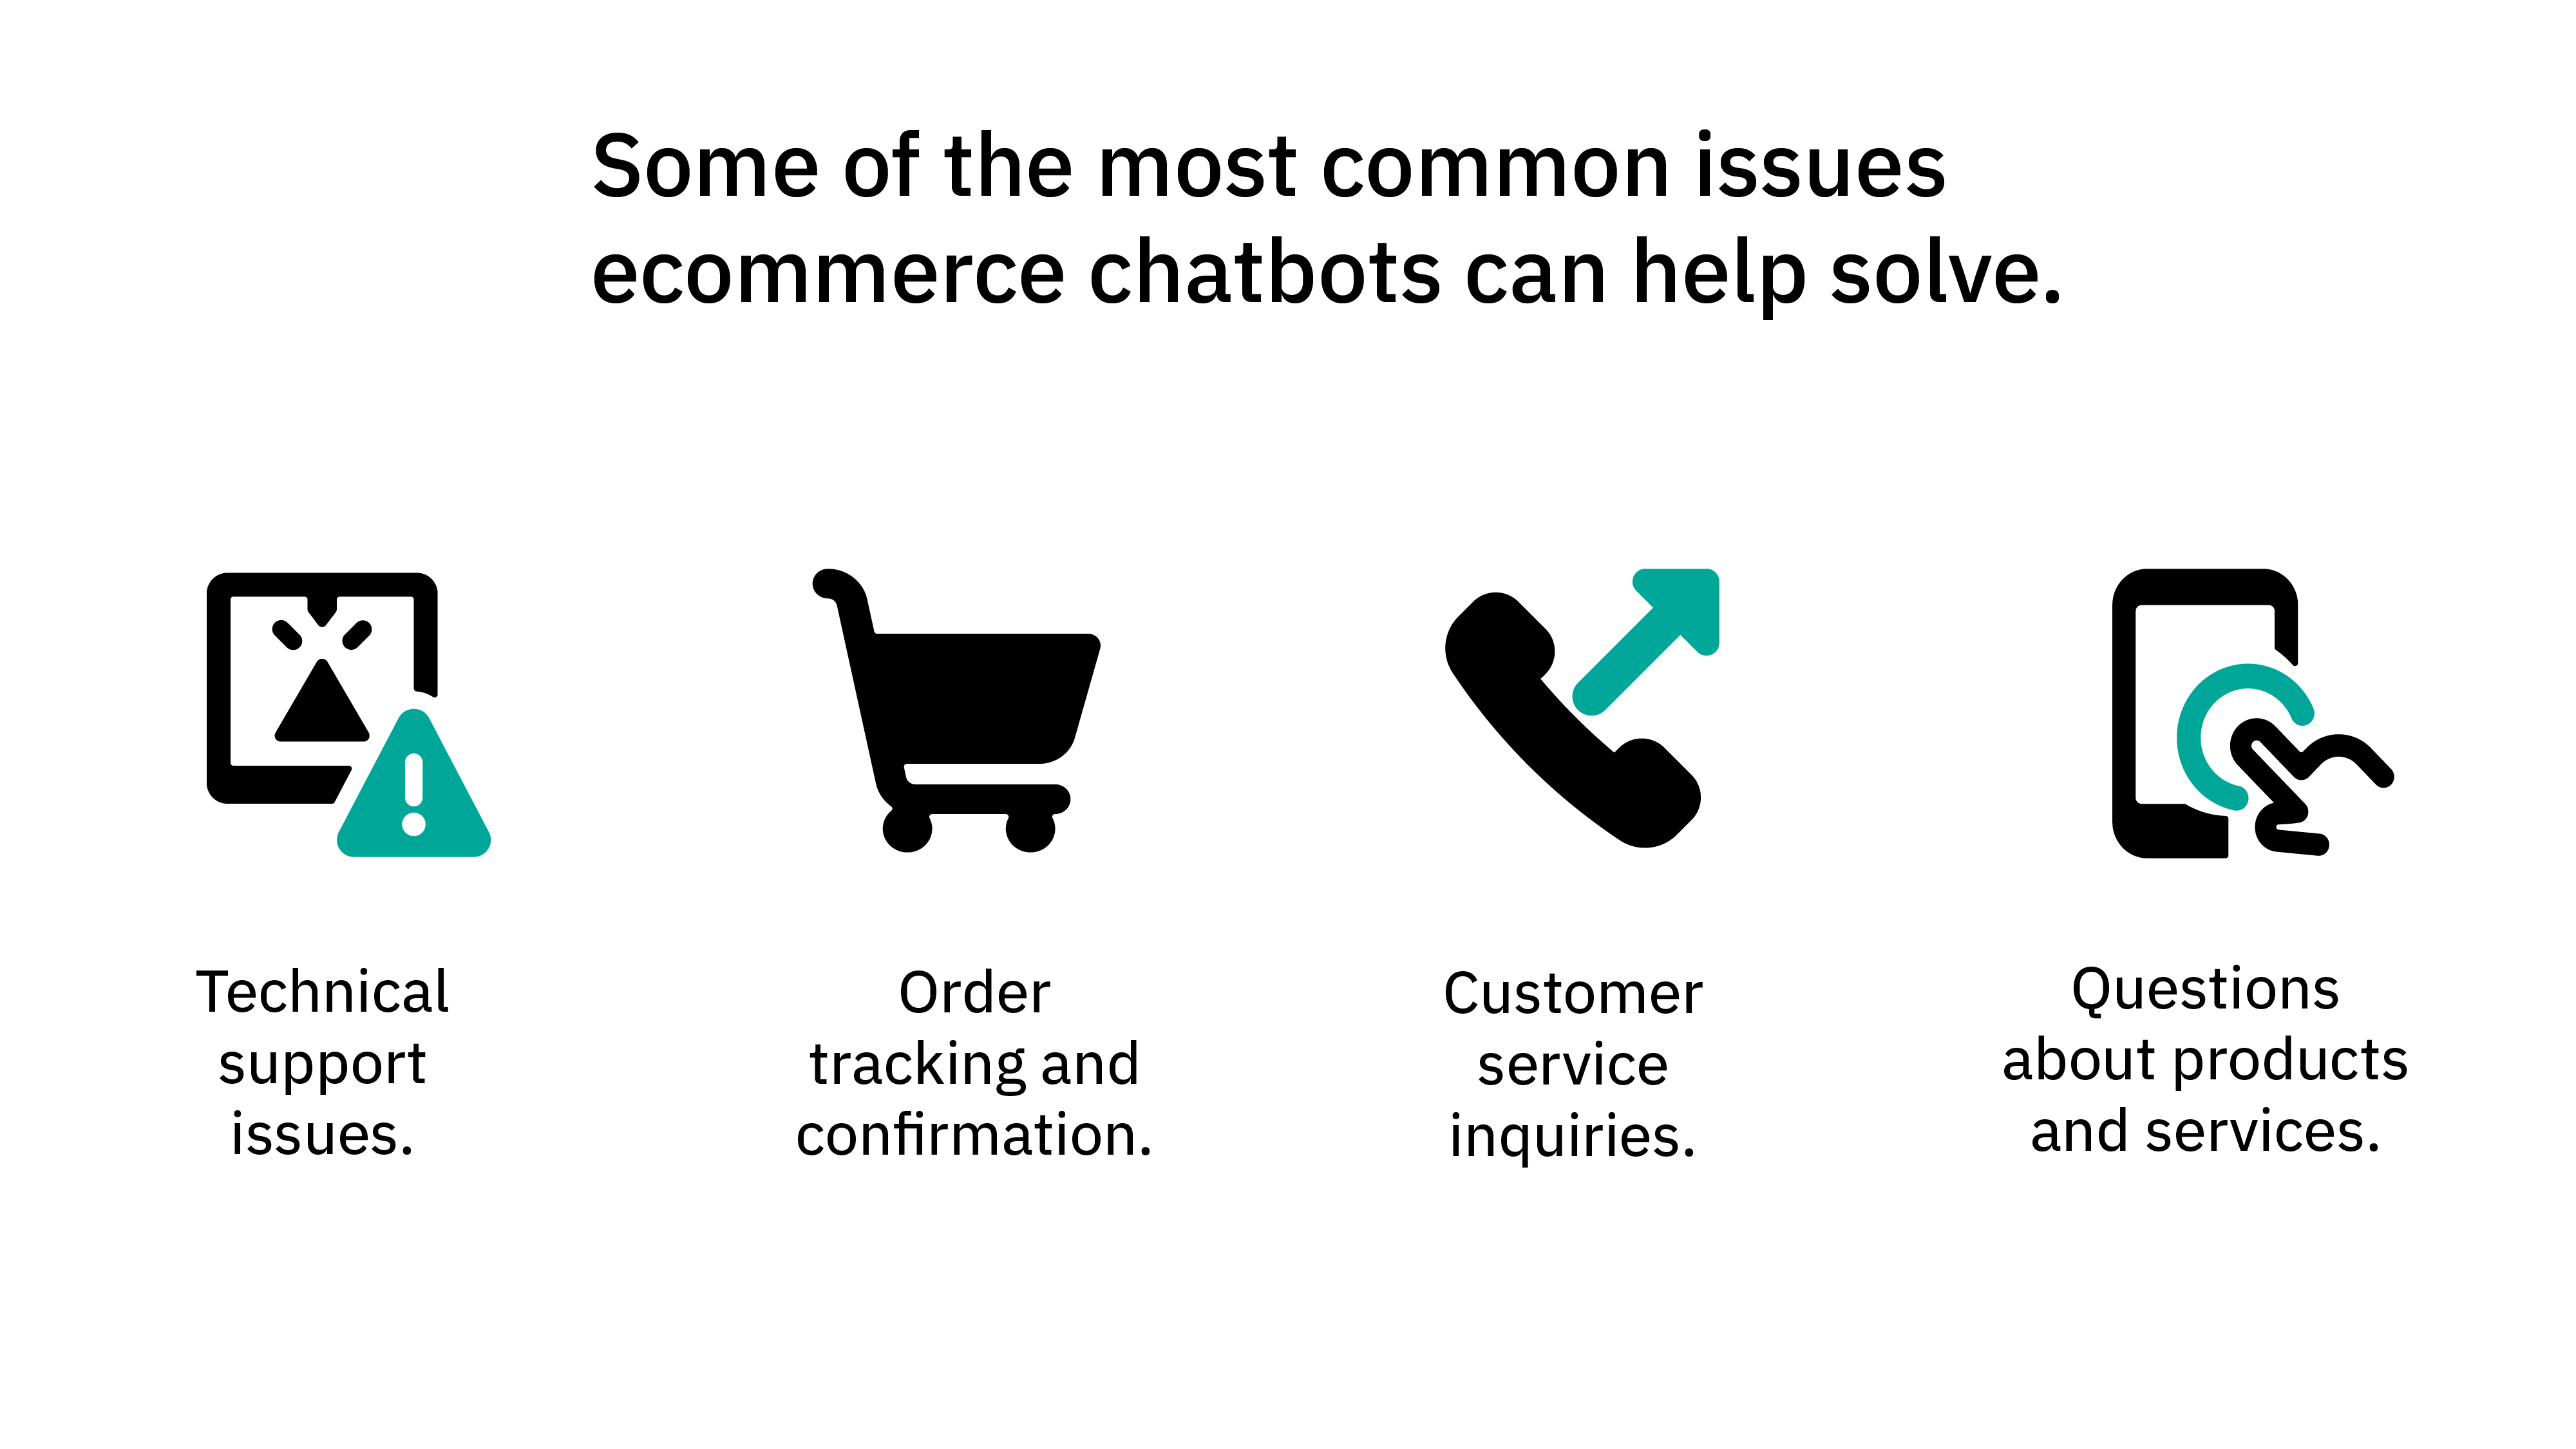 Some of the common issues ecommerce chatbots can reduce